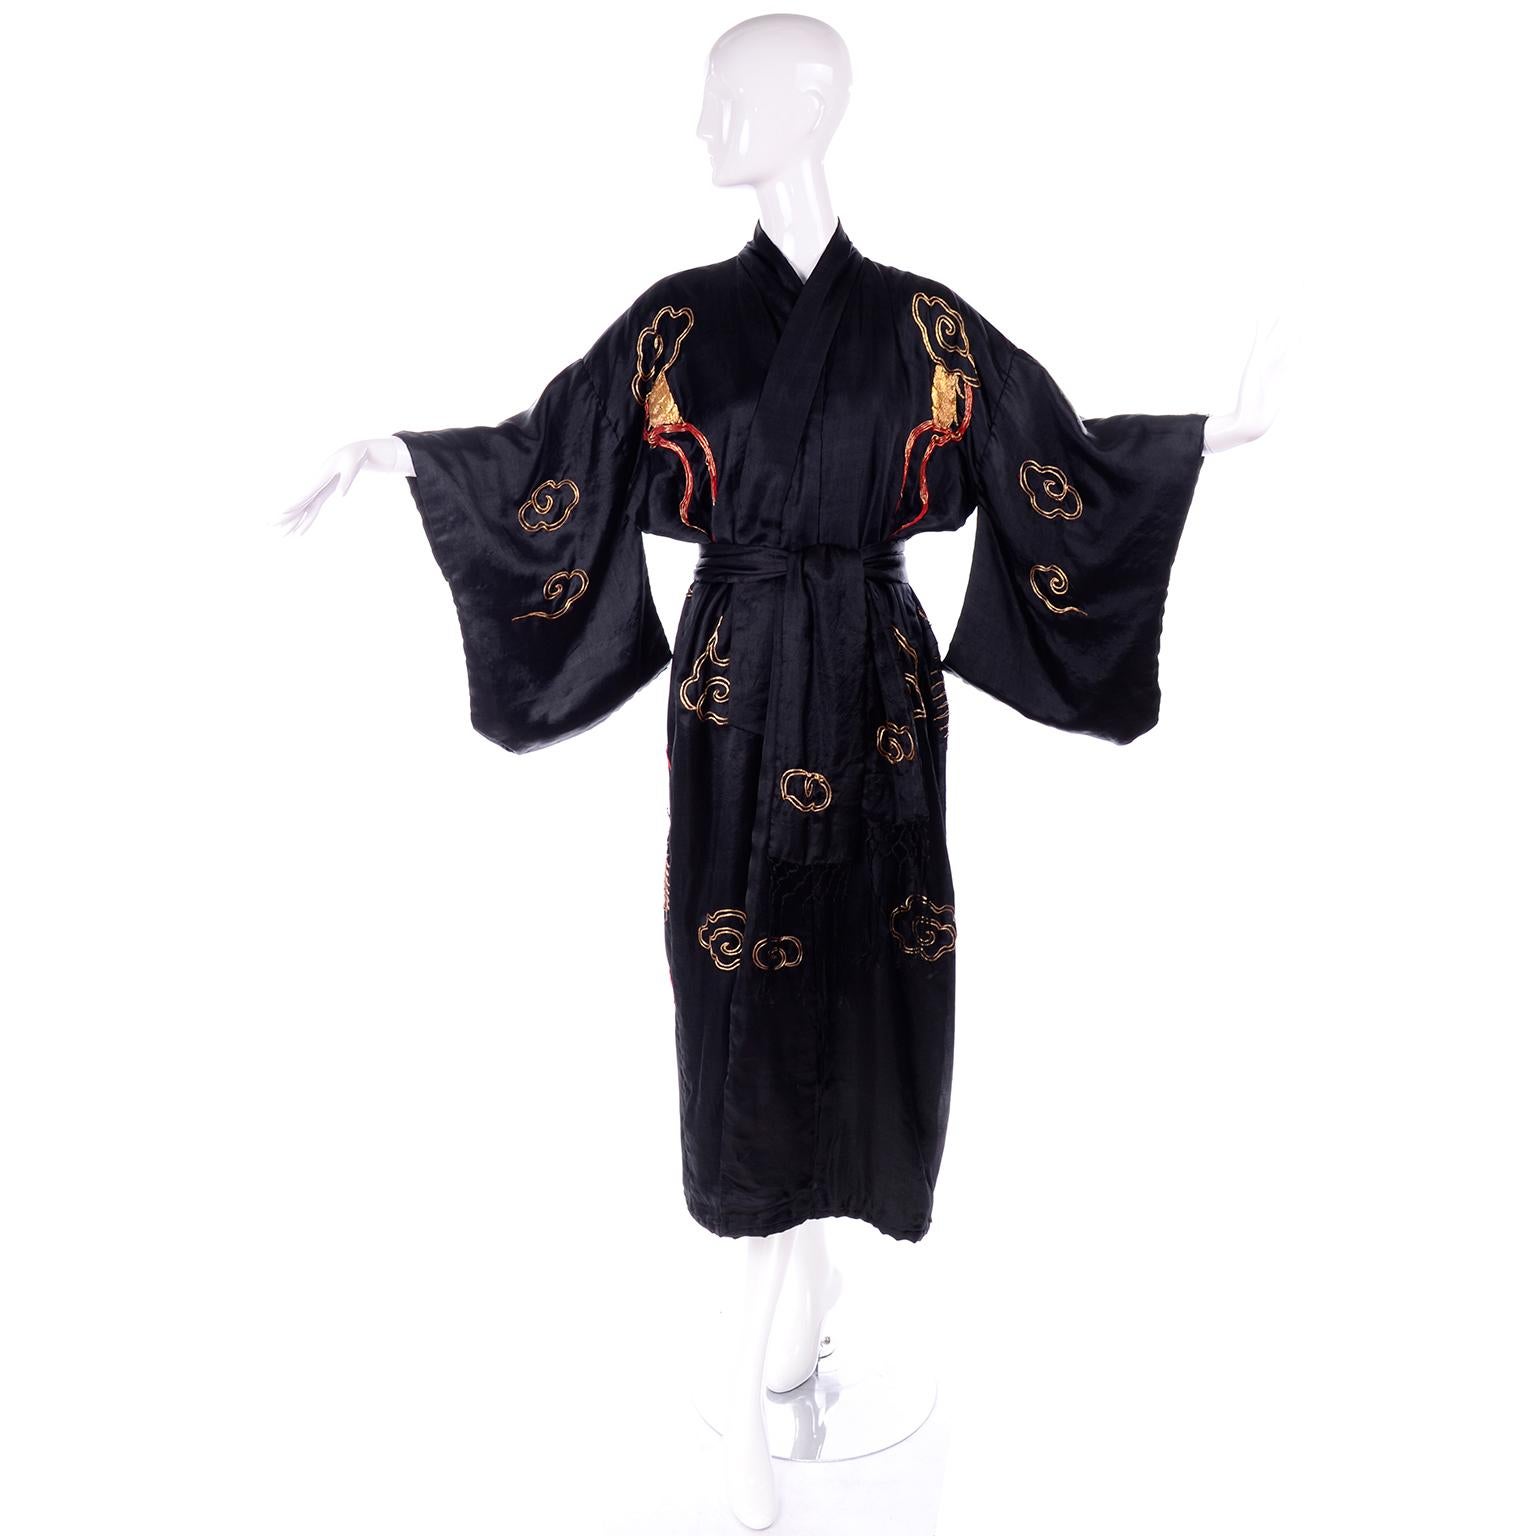 This is an incredible Japanese vintage embroidered kimono with a Chinese dragon design! This long kimono is made of a padded black silk, with thick metallic embroidery depicting dragons, clouds and lightning bolts. The thick metallic gold and red